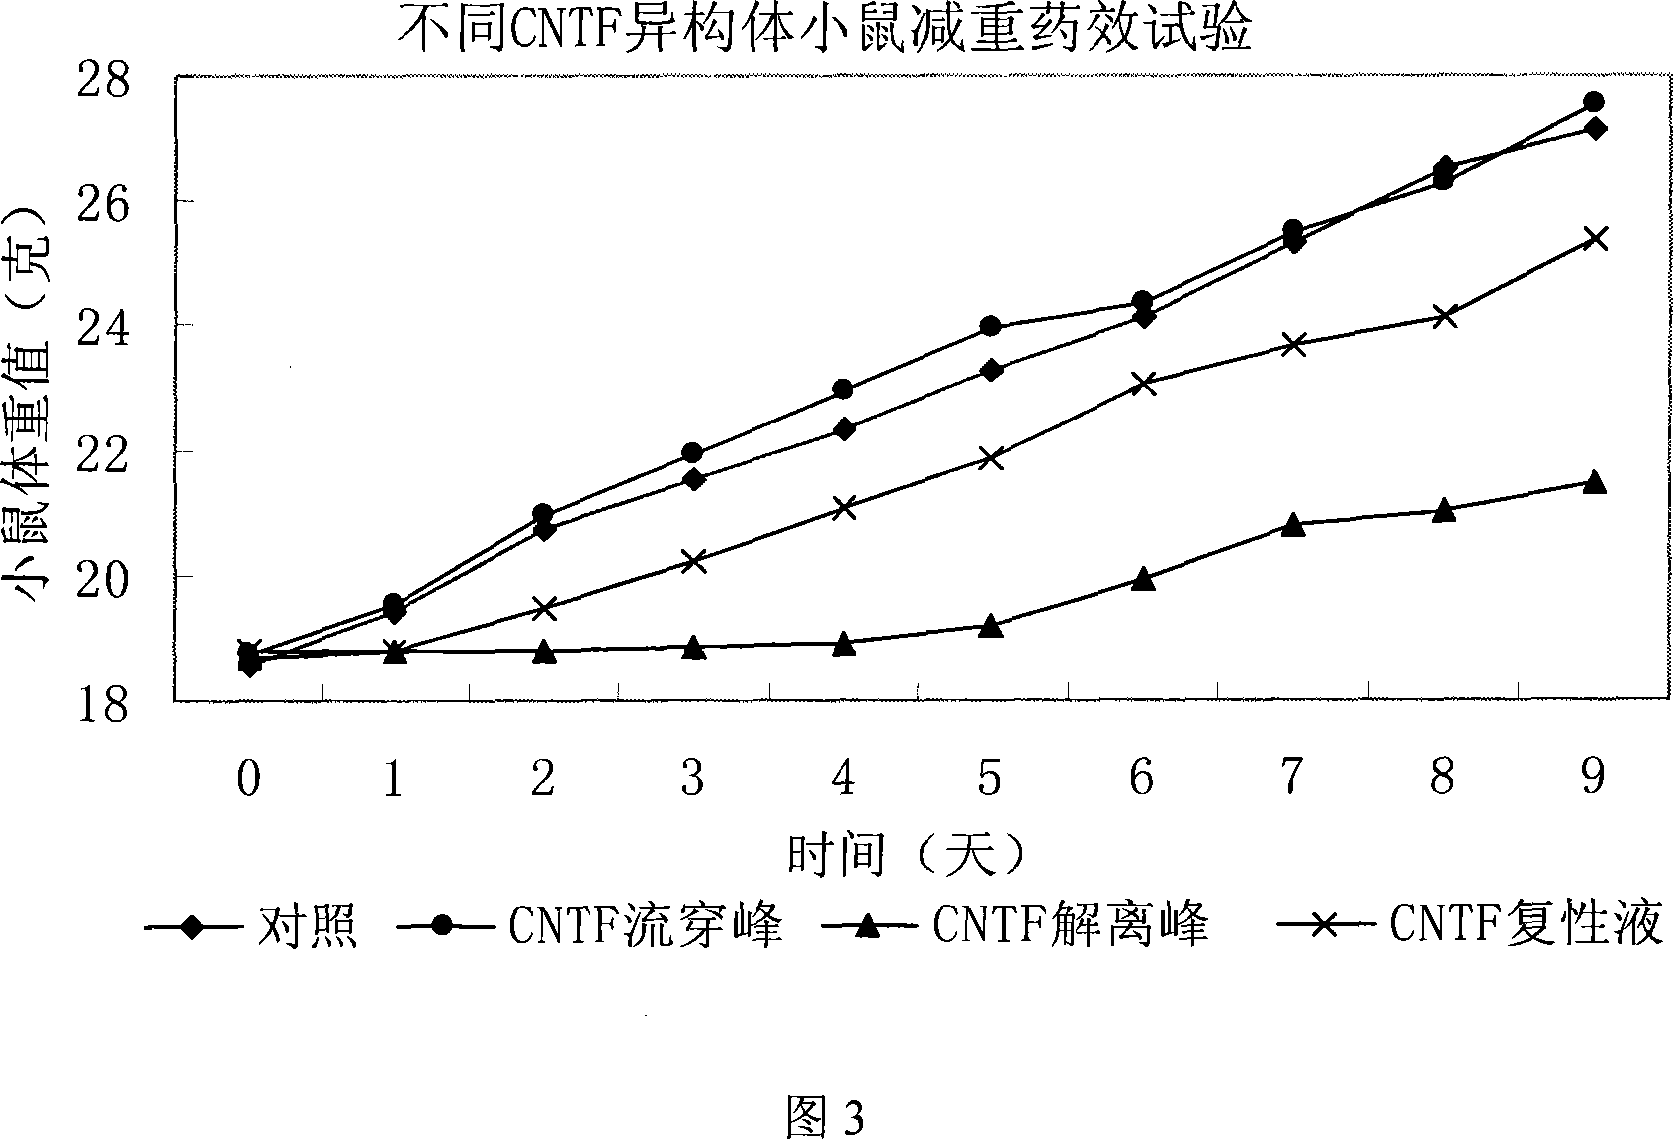 Method for separating isomerism protein from recombinant human ciliary neurotrophy factor and its mutant